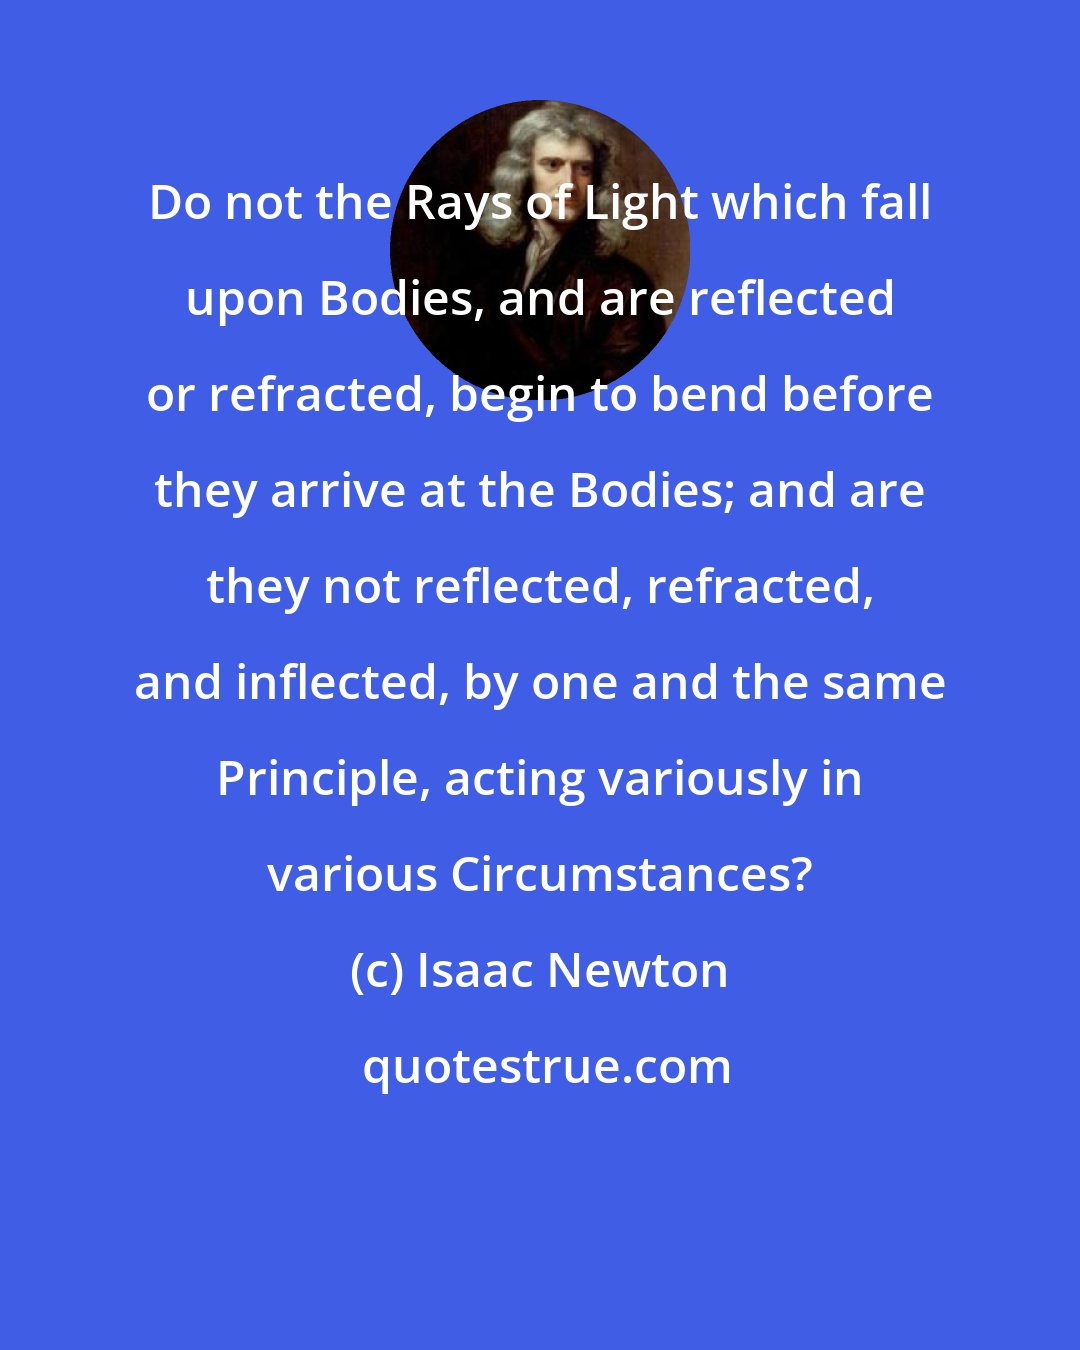 Isaac Newton: Do not the Rays of Light which fall upon Bodies, and are reflected or refracted, begin to bend before they arrive at the Bodies; and are they not reflected, refracted, and inflected, by one and the same Principle, acting variously in various Circumstances?